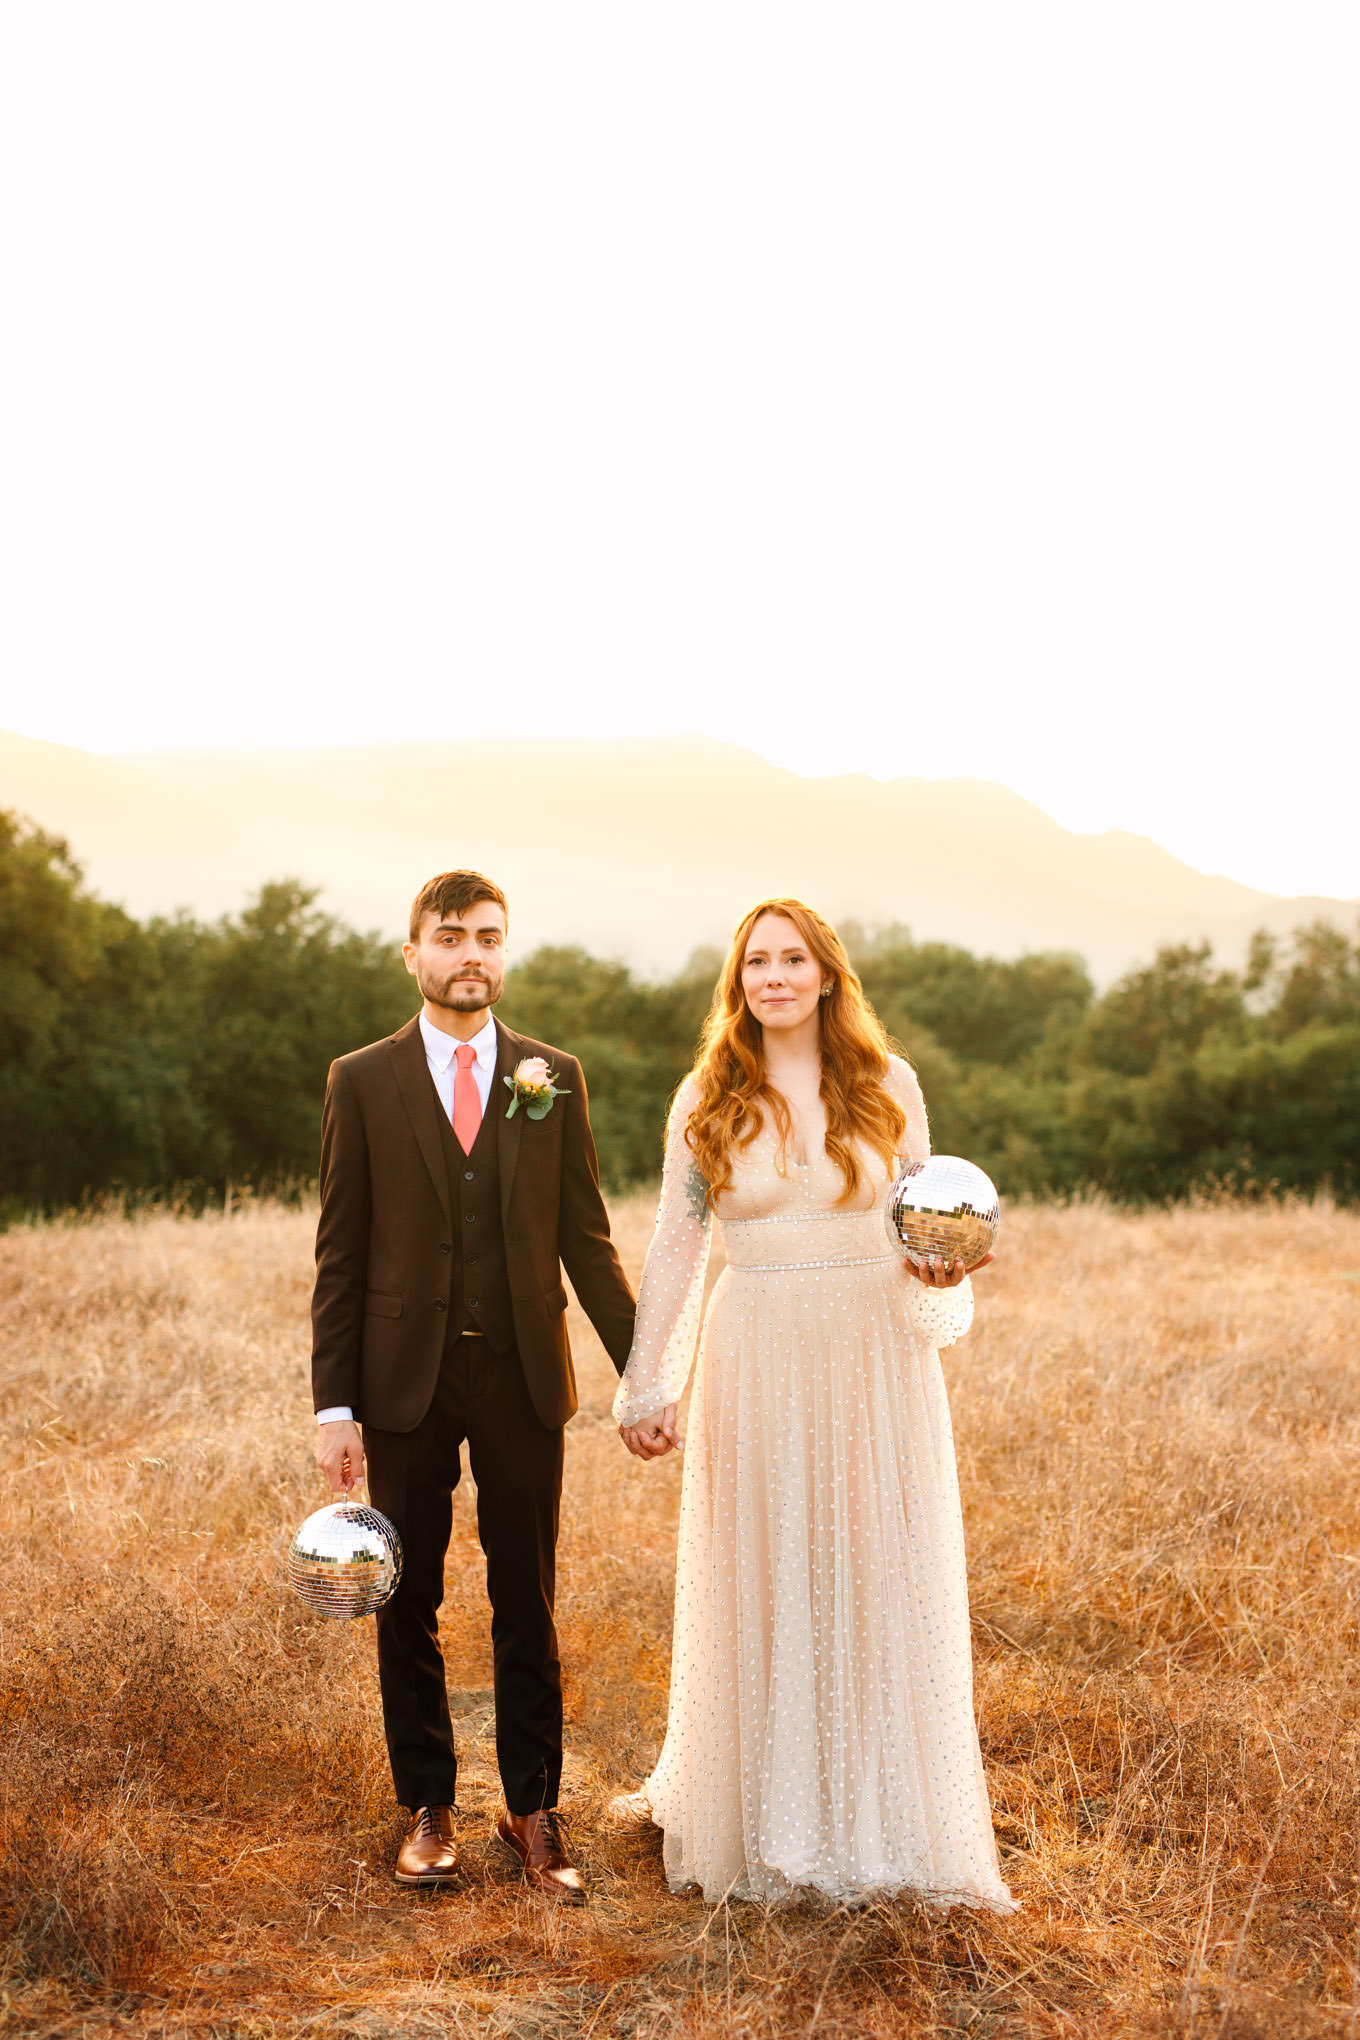 Bride and groom with disco balls at Topanga Canyon elopement Los Angeles Chinatown engagement session | Engagement, elopement, and wedding photography roundup of Mary Costa’s favorite images from 2020 | Colorful and elevated photography for fun-loving couples in Southern California | #2020wedding #elopement #weddingphoto #weddingphotography #microwedding   Source: Mary Costa Photography | Los Angeles